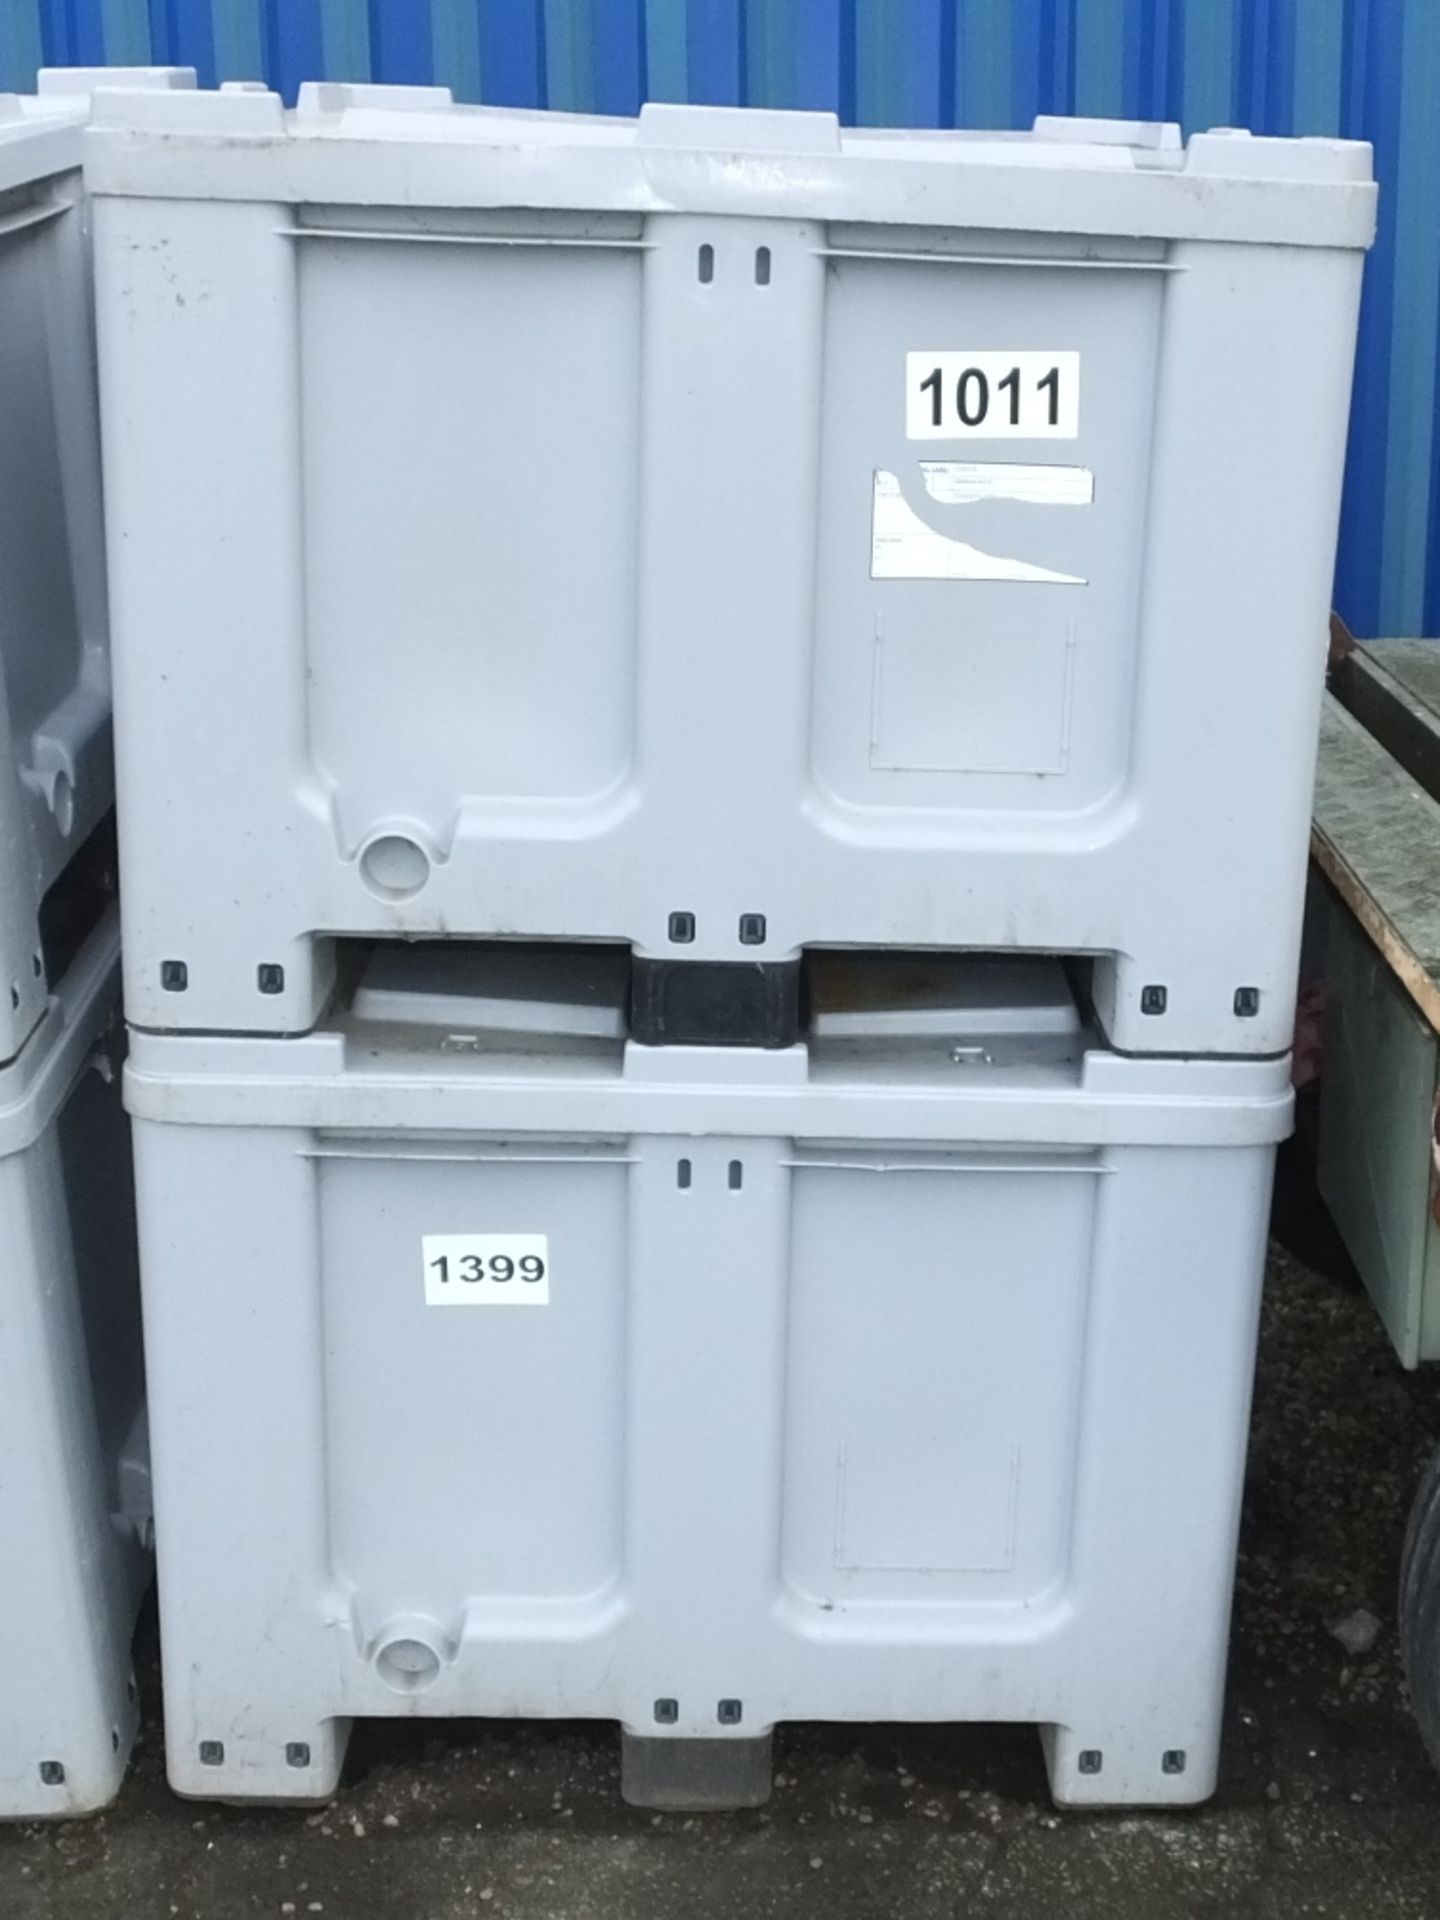 2x Plastic Shipping Cases Grey L1220 x W1020 x H800mm - with lids